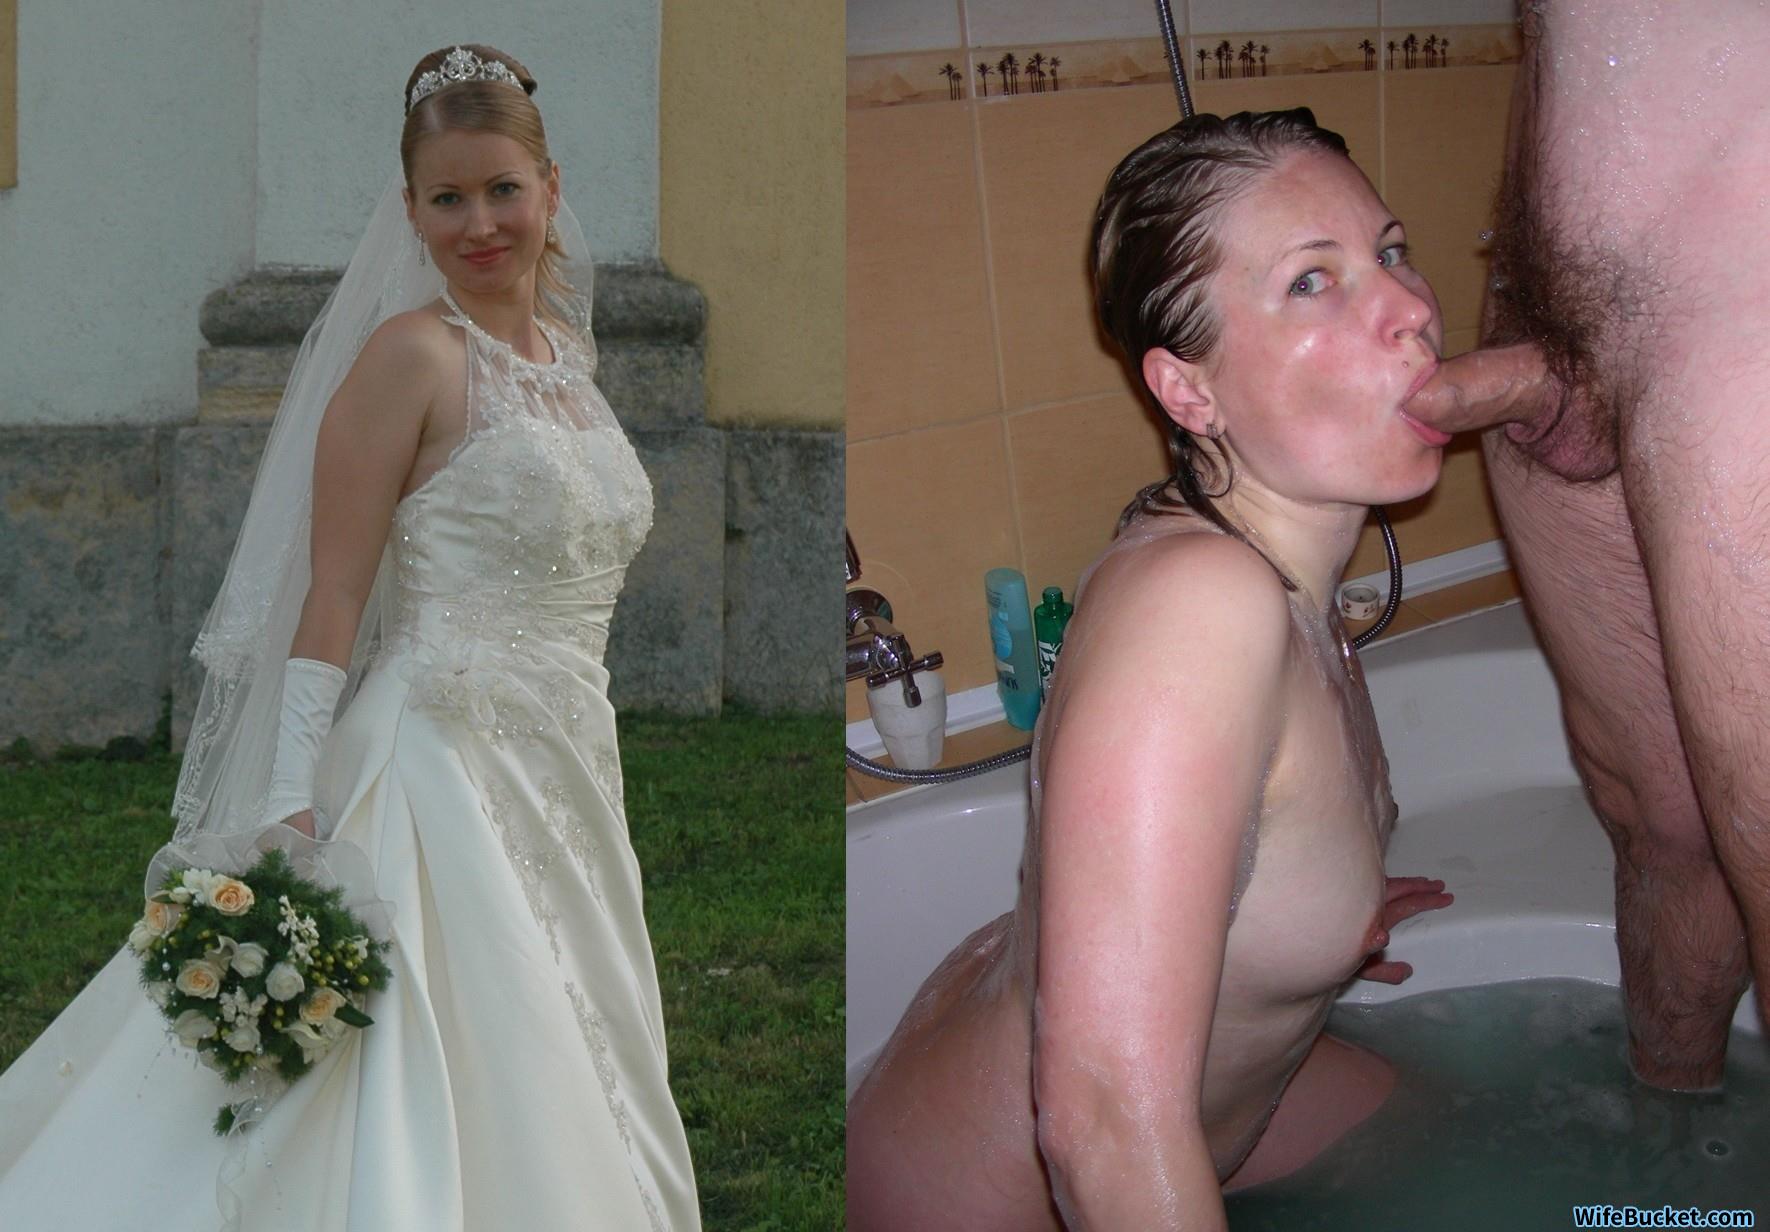 Before-after nudes of sexy amateur brides! Some home porn, too -) image picture